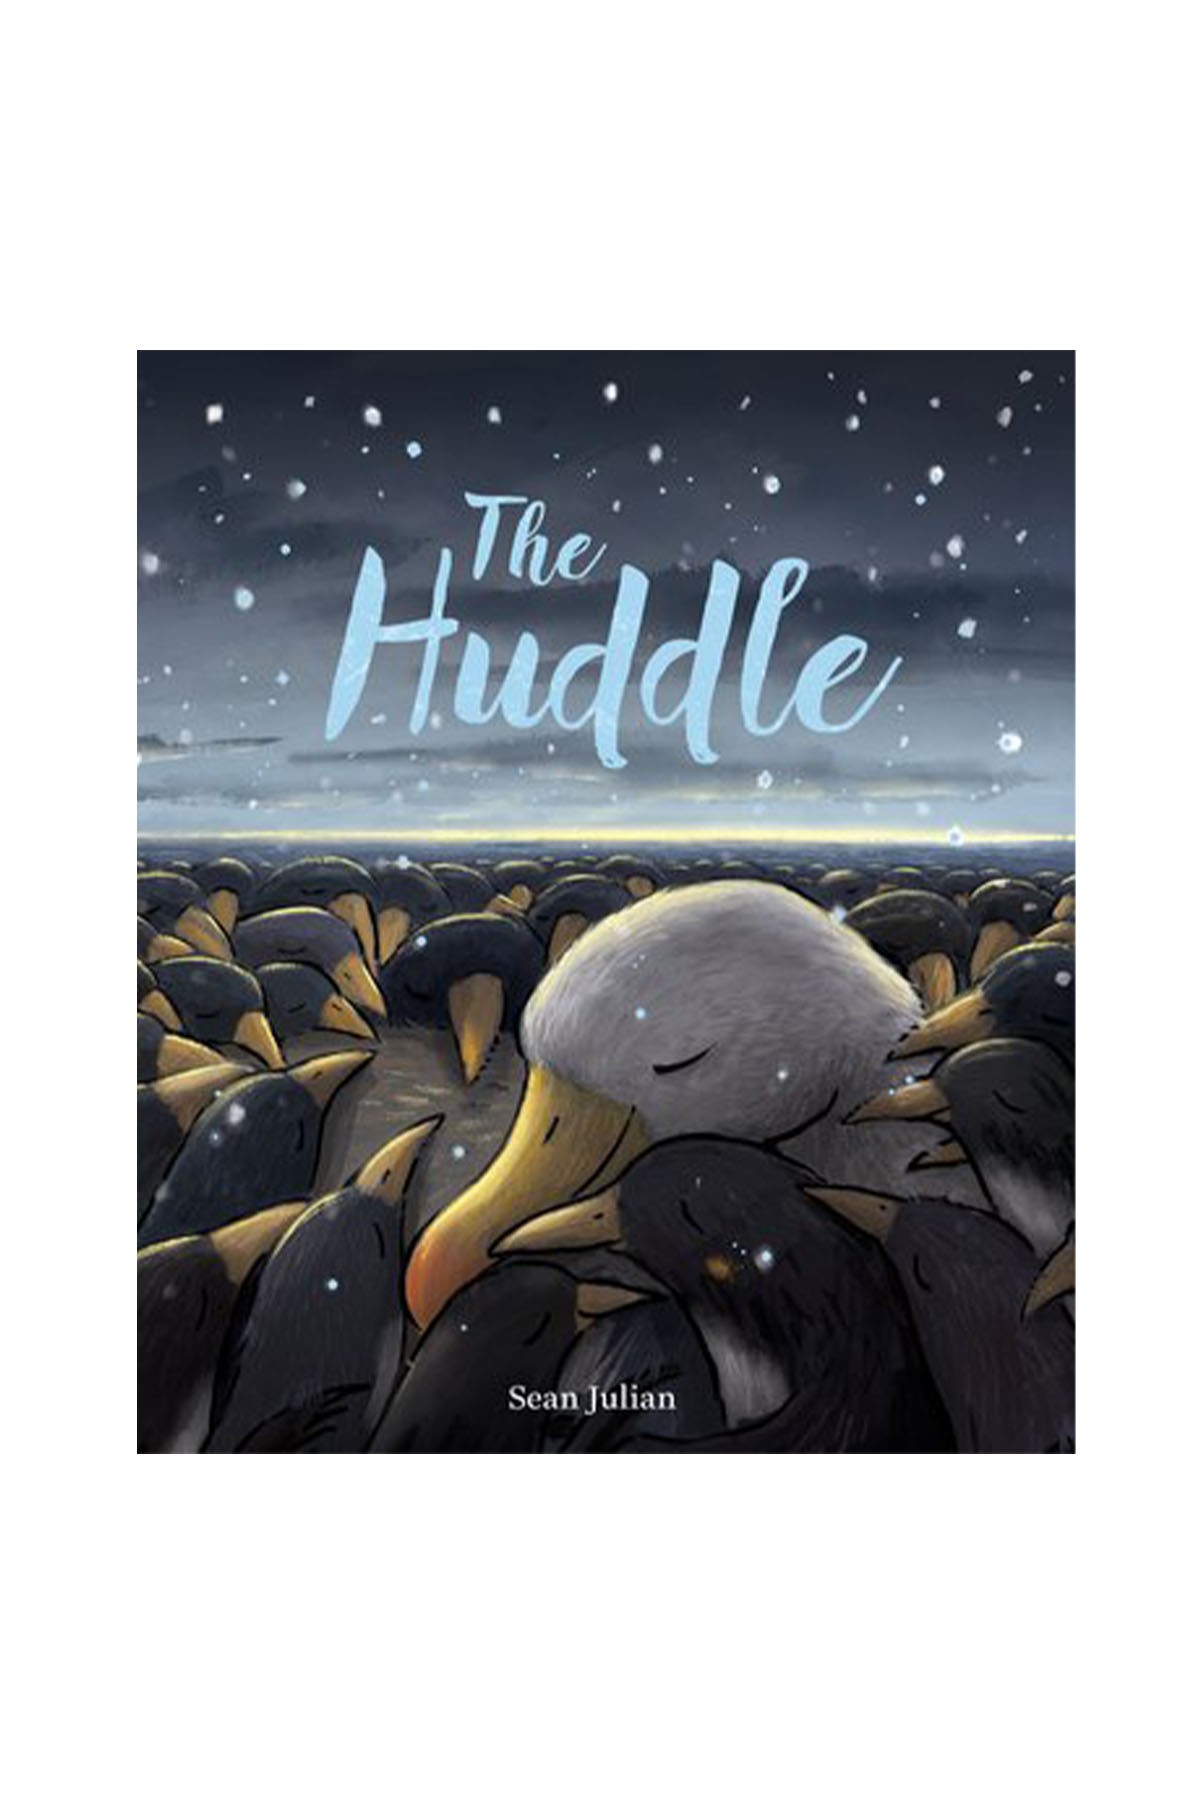 Oxford Childrens Book - The Huddle